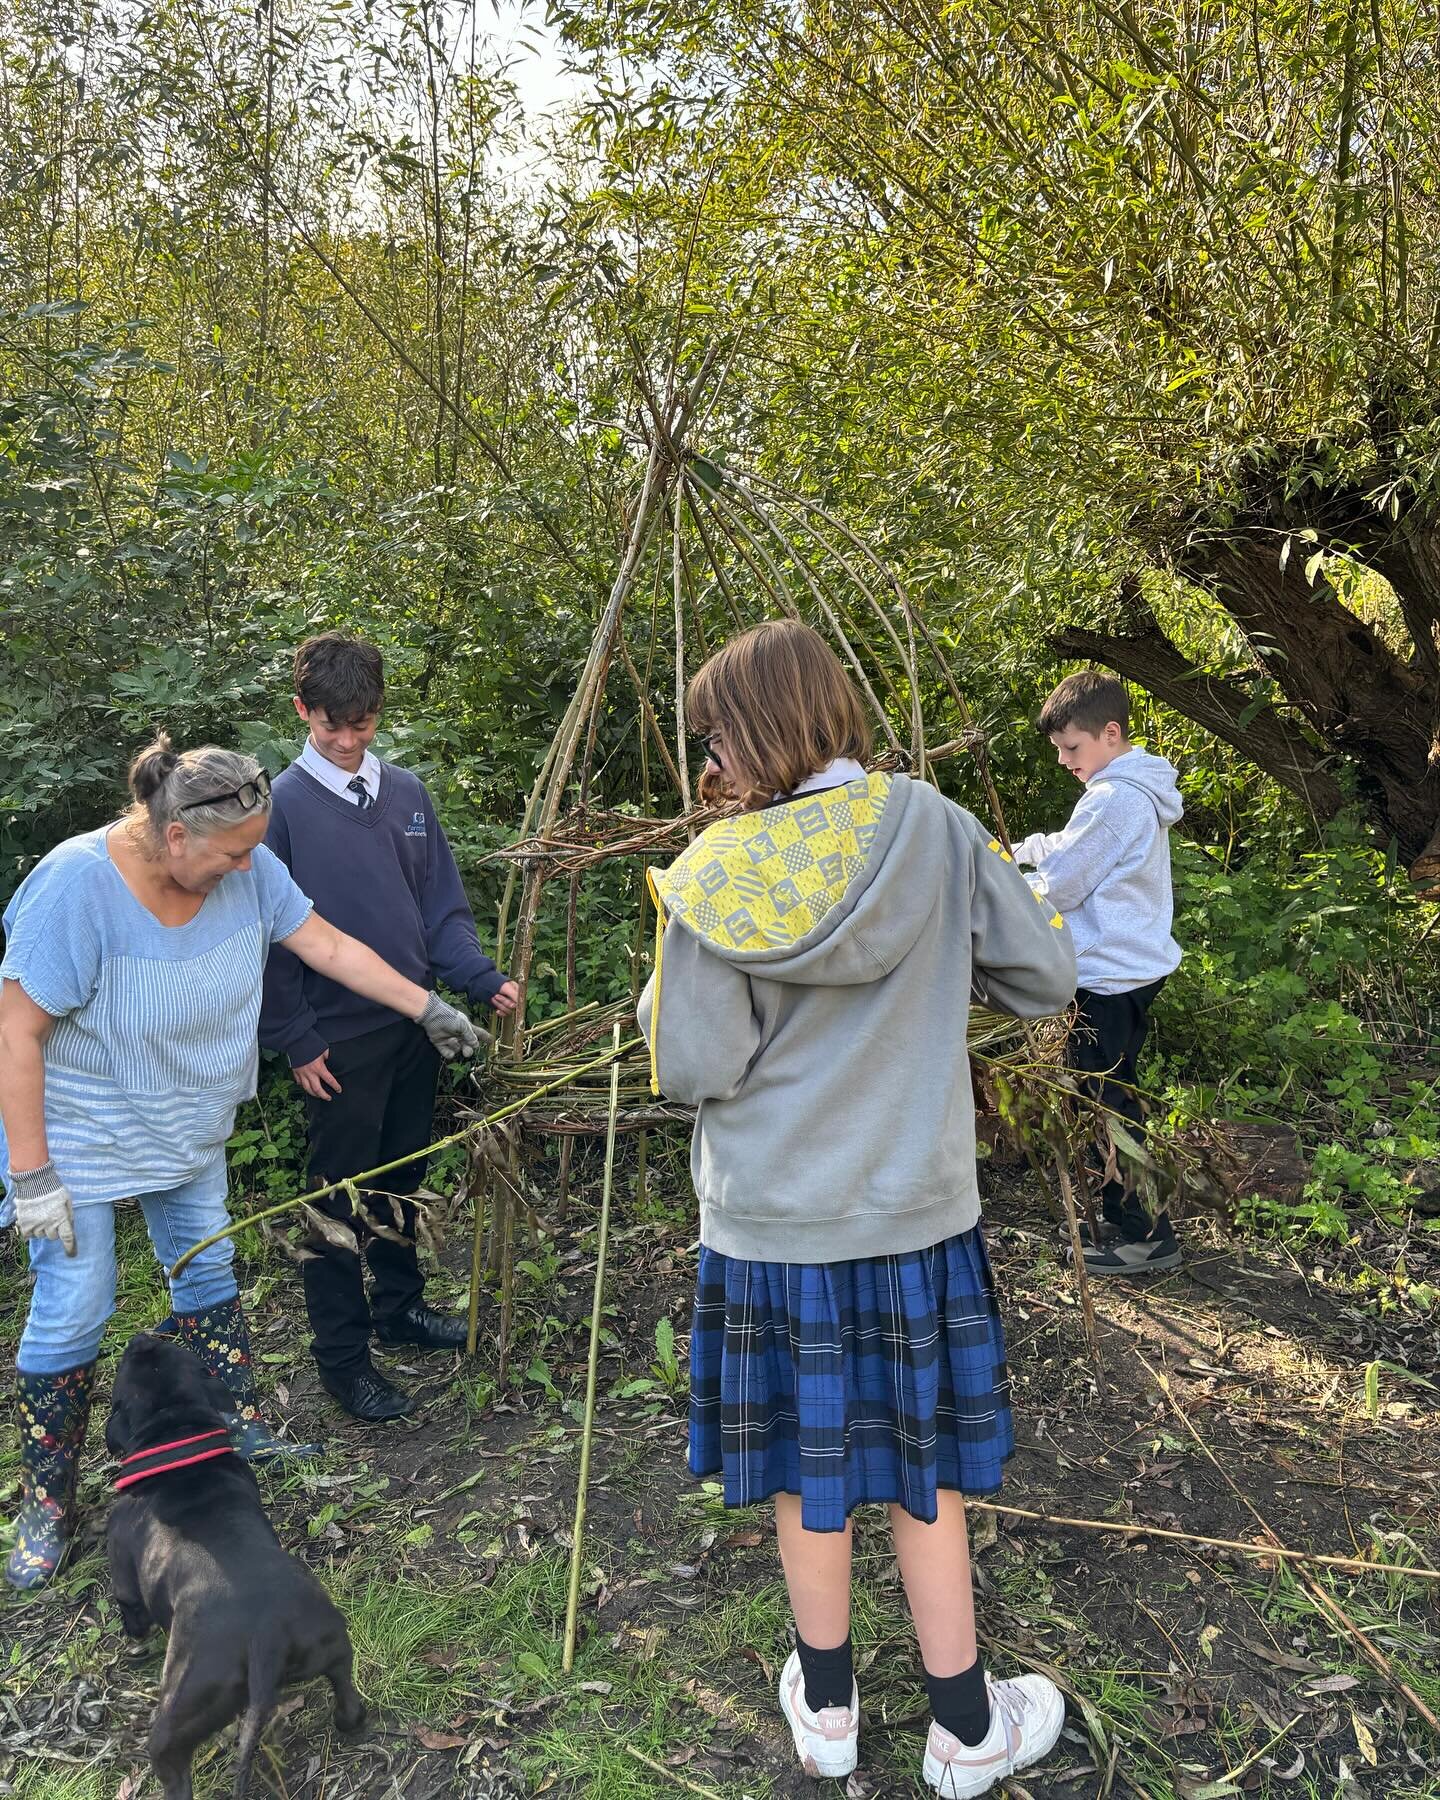 Our wellbeing groups for teenagers provide a welcome opportunity to spend time outside in nature. Farnham Heath End School @teamfhes brings two groups a week to help build resilience and improve the wellbeing of their students. Thank you to @waverley